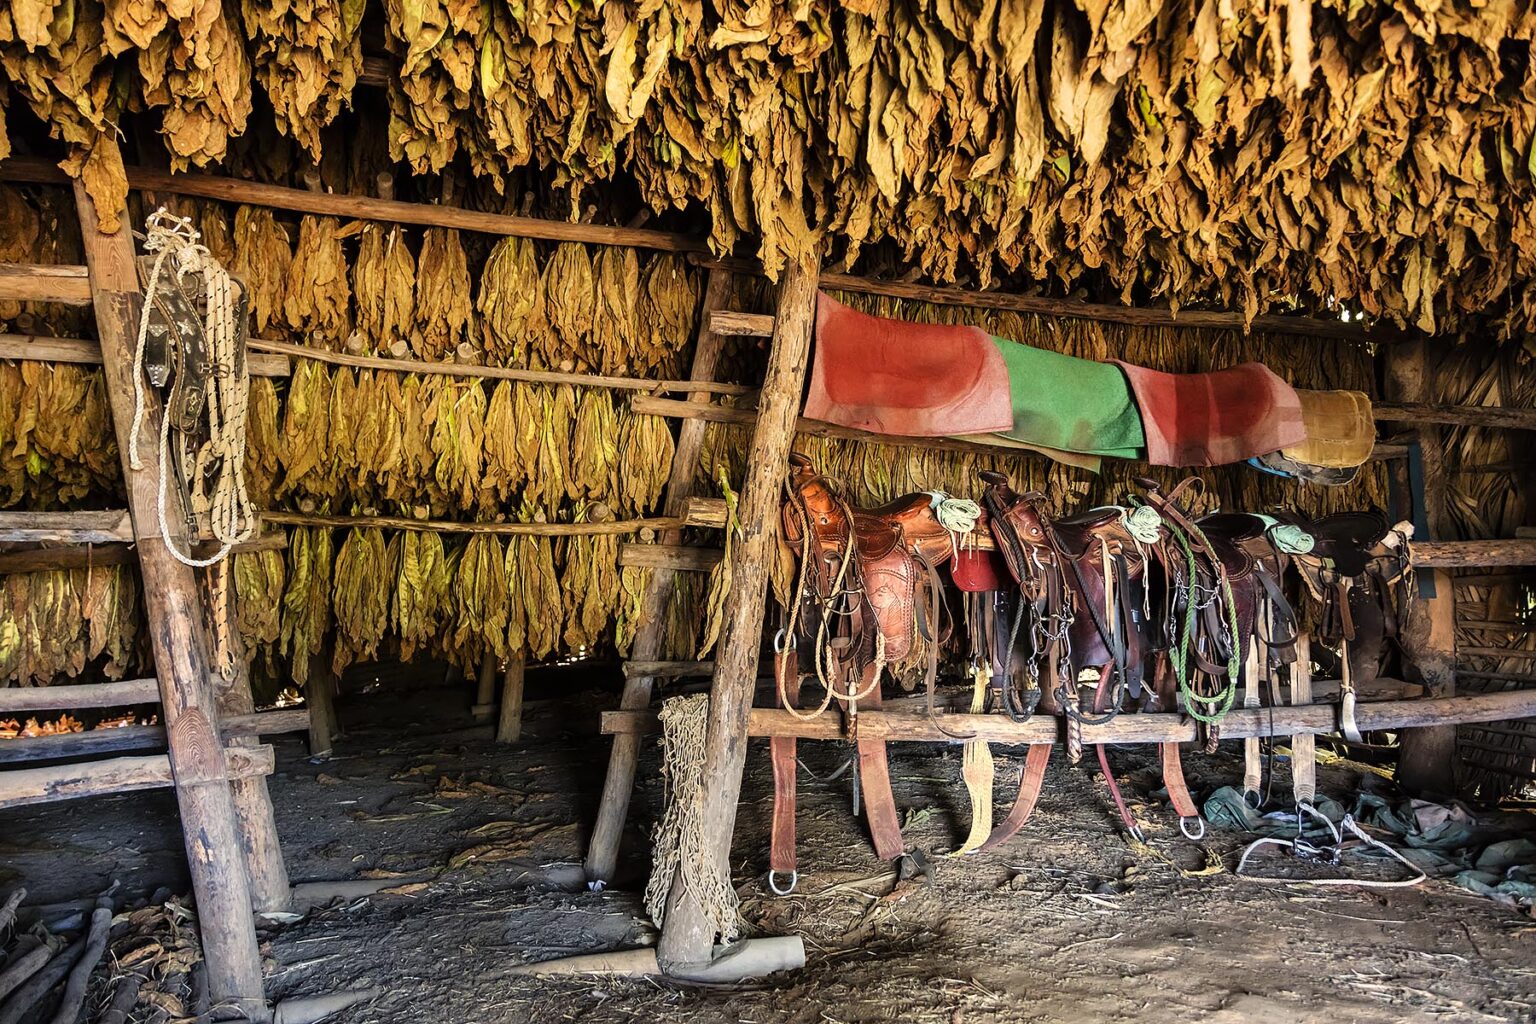 Tobacco uses for making cigars dries above saddles inside a barns in the Vinales Valley - VINALES, CUBA